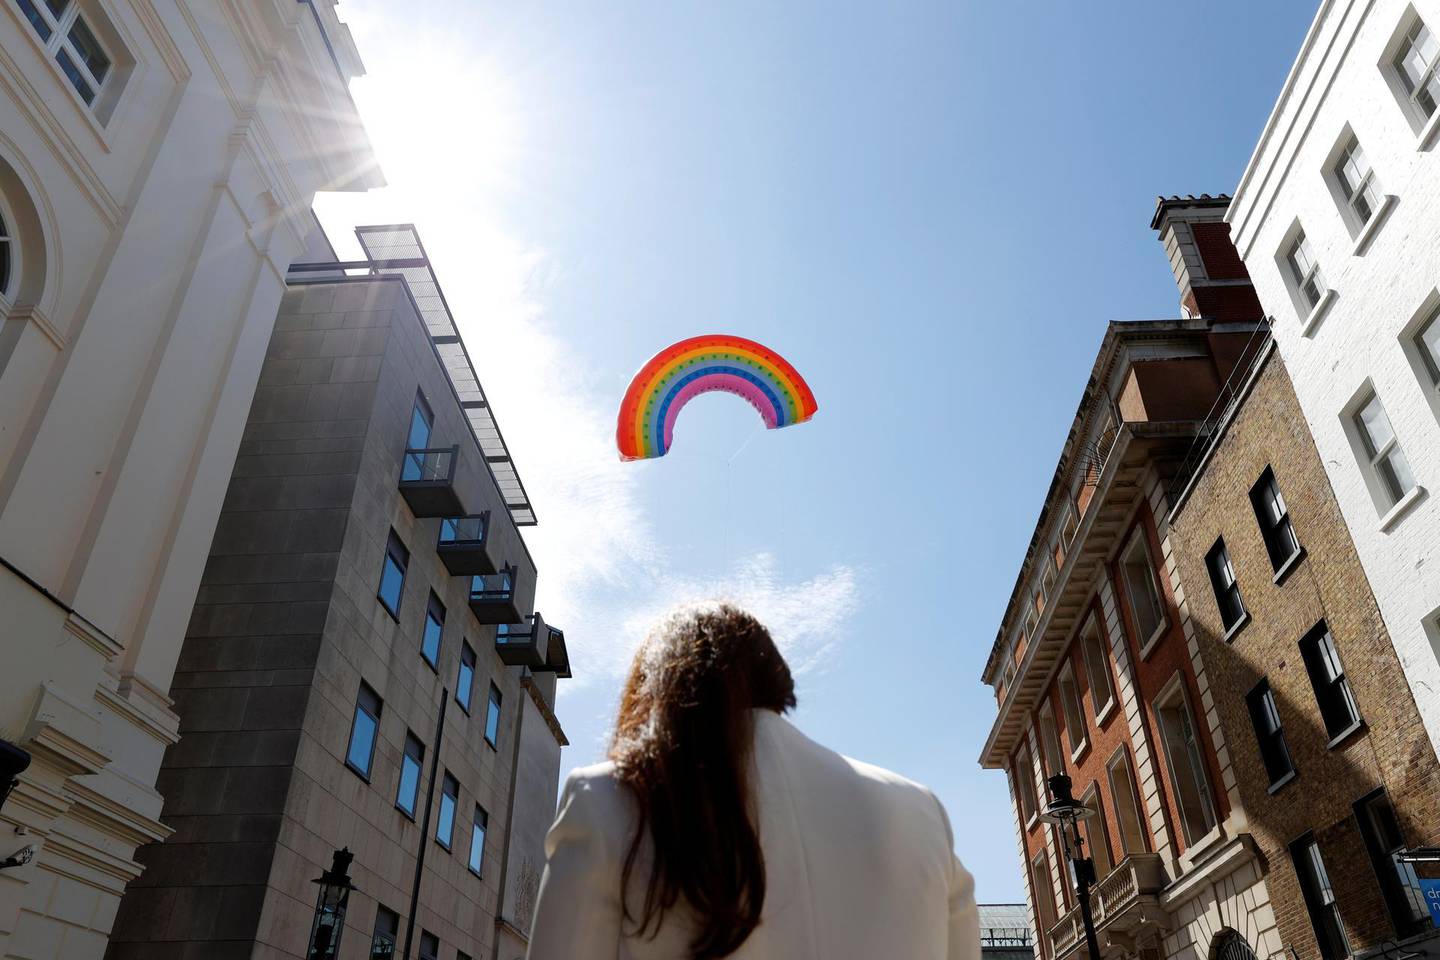 A rainbow arch balloon is flown above Covent Garden to celebrate the reopening of its shops, following the outbreak of the coronavirus disease (COVID-19) in London, Britain June 15, 2020. REUTERS/John Sibley